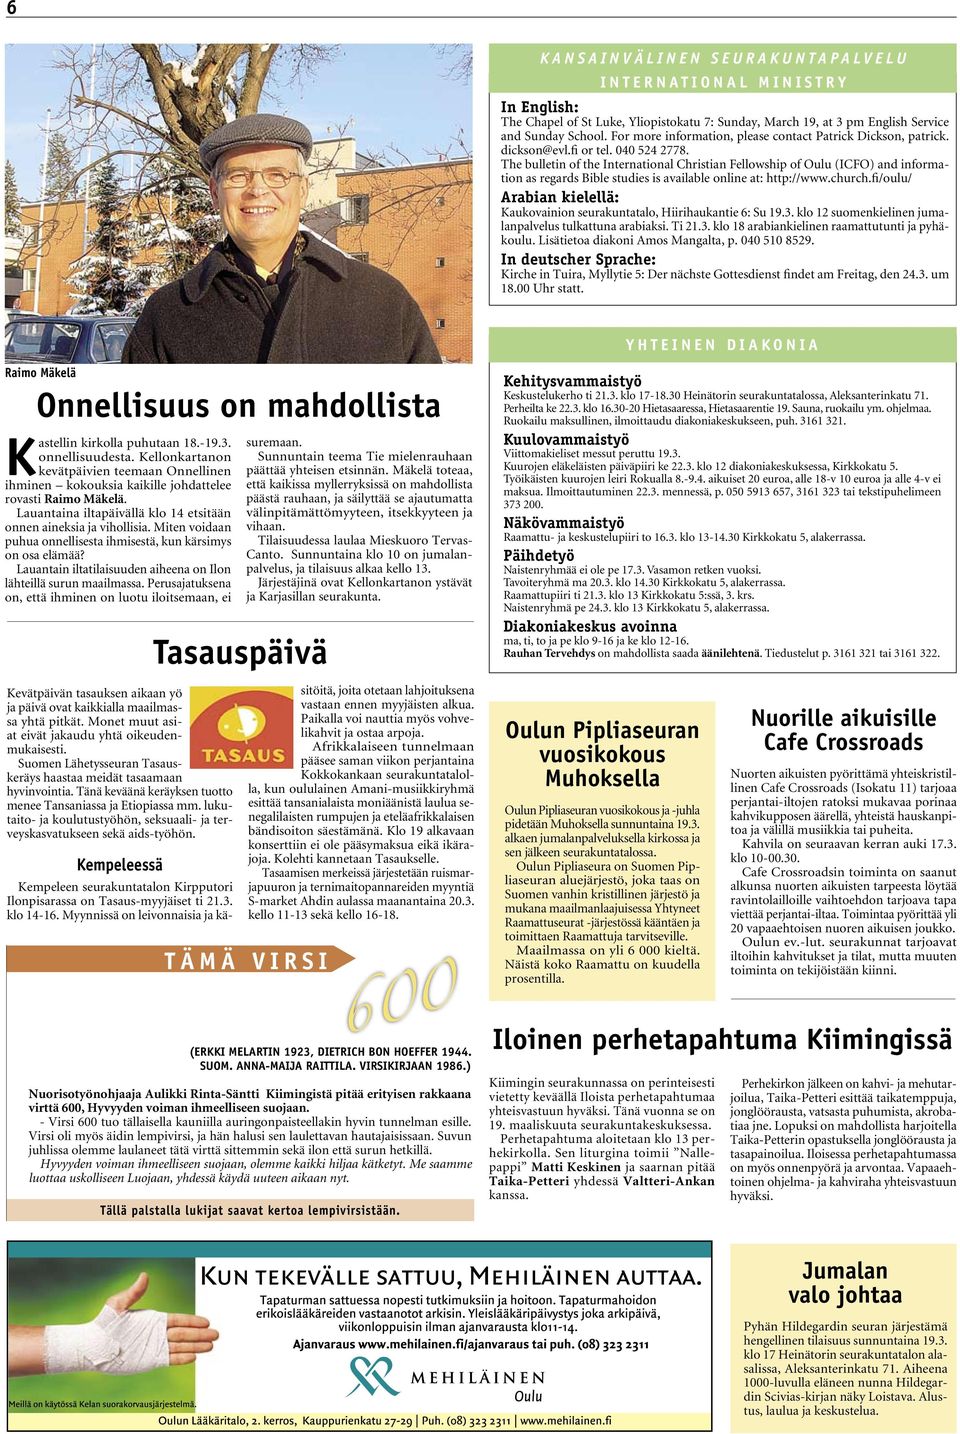 The bulletin of the International Christian Fellowship of Oulu (ICFO) and information as regards Bible studies is available online at: http://www.church.